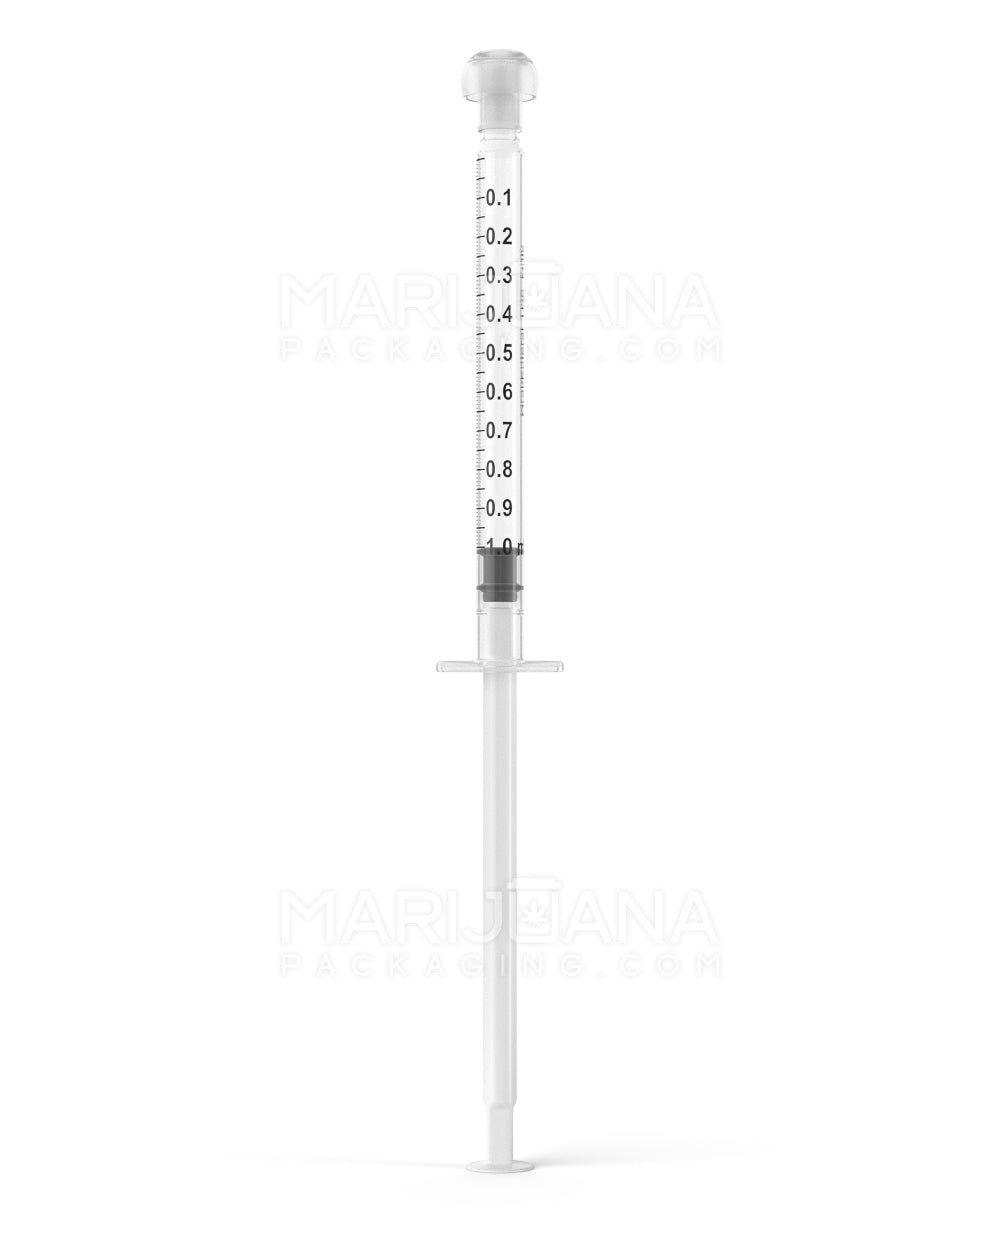 Plastic Oral Concentrate Syringes | 1mL - 0.1mL Increments | Sample - 1